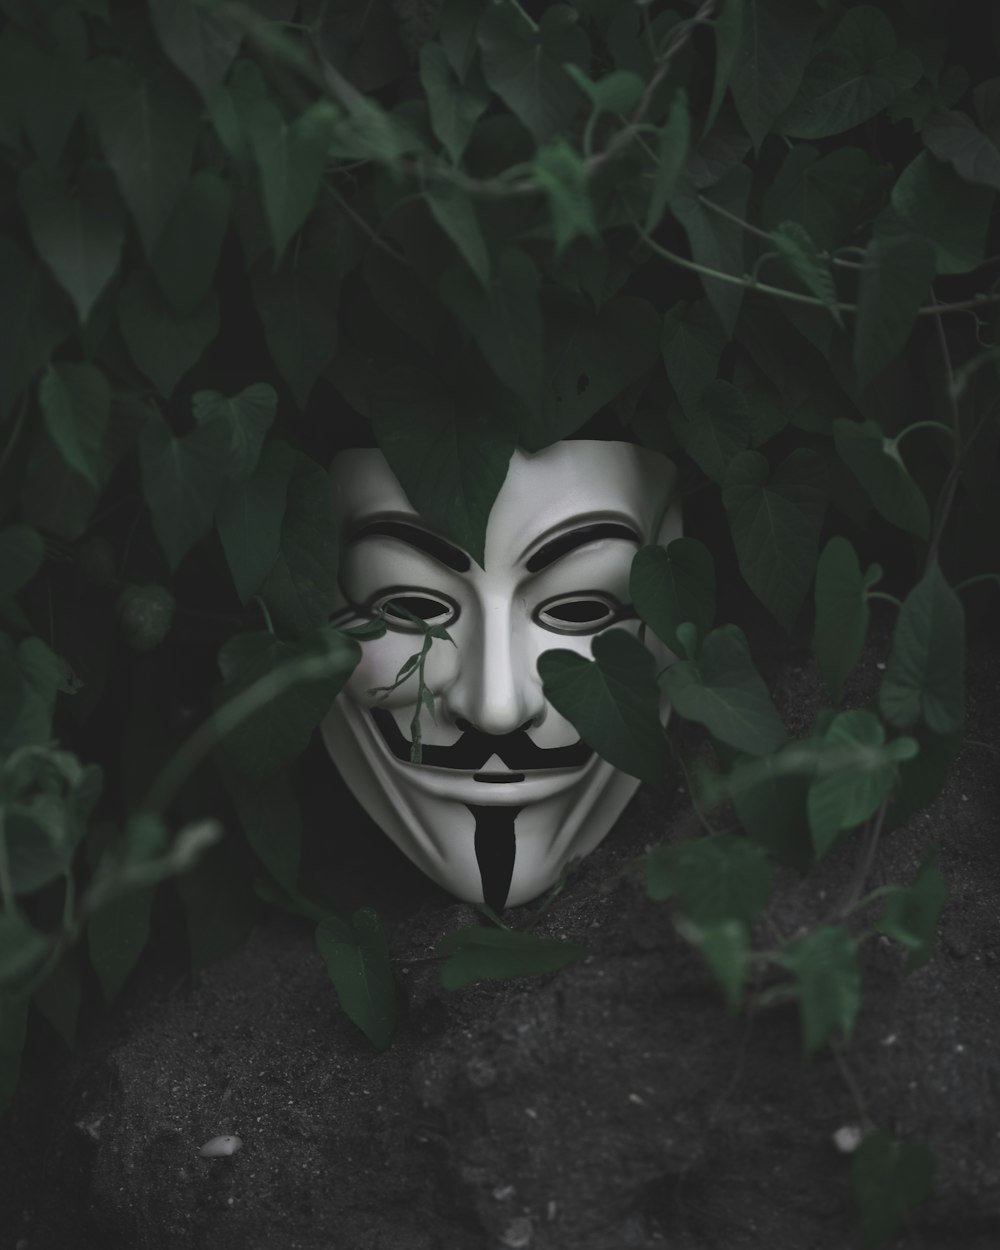 Guy Fawkes mask on green leafed plant